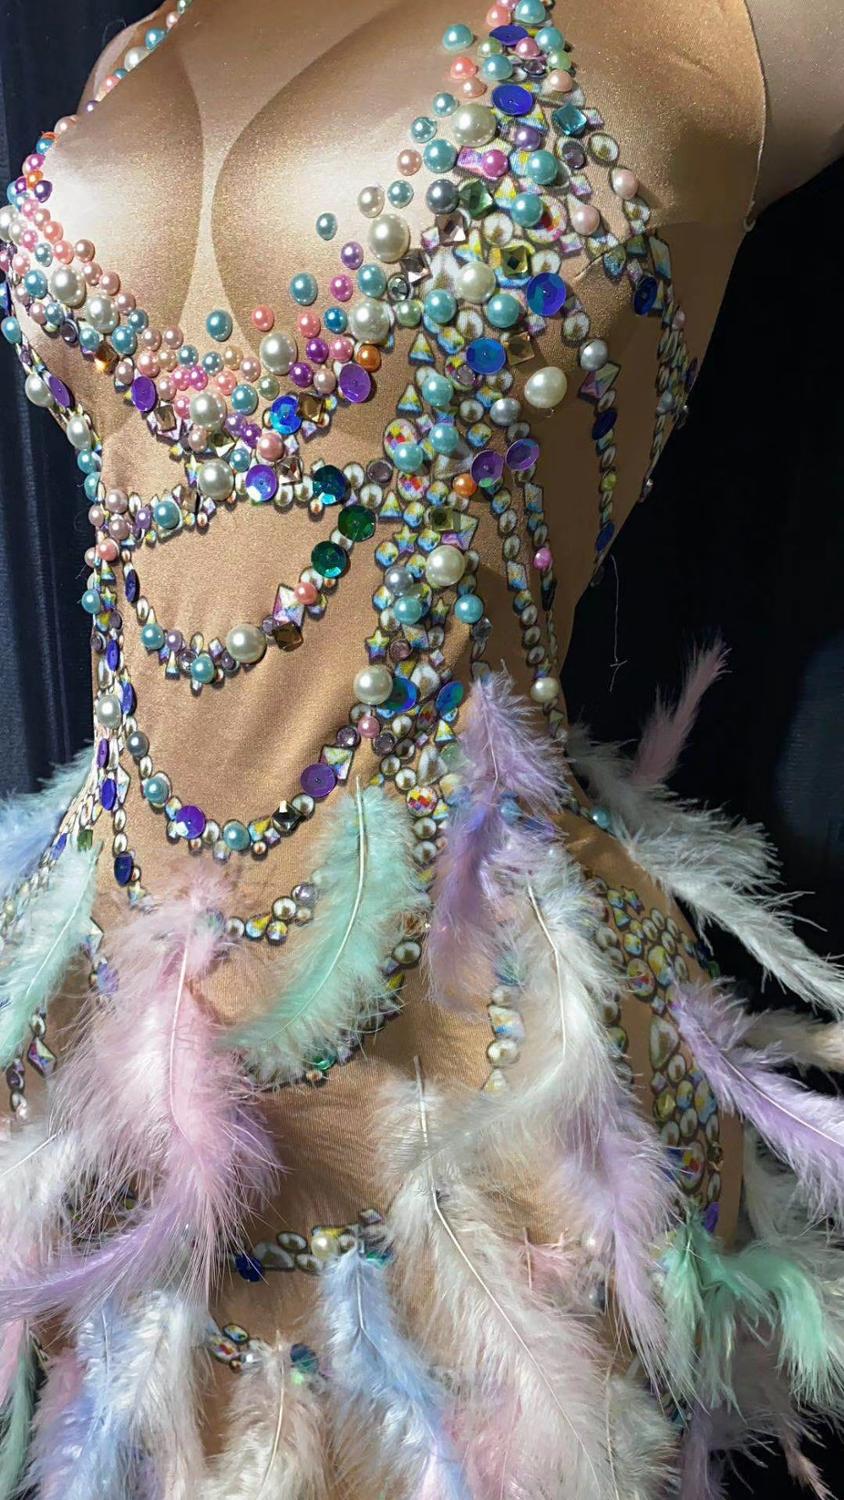 Sexy Stage Multi-color Rhinestone Pearl Sequin Feather Slit Feather Dress Prom Birthday Celebrate Dress Women Dancer Show Dress